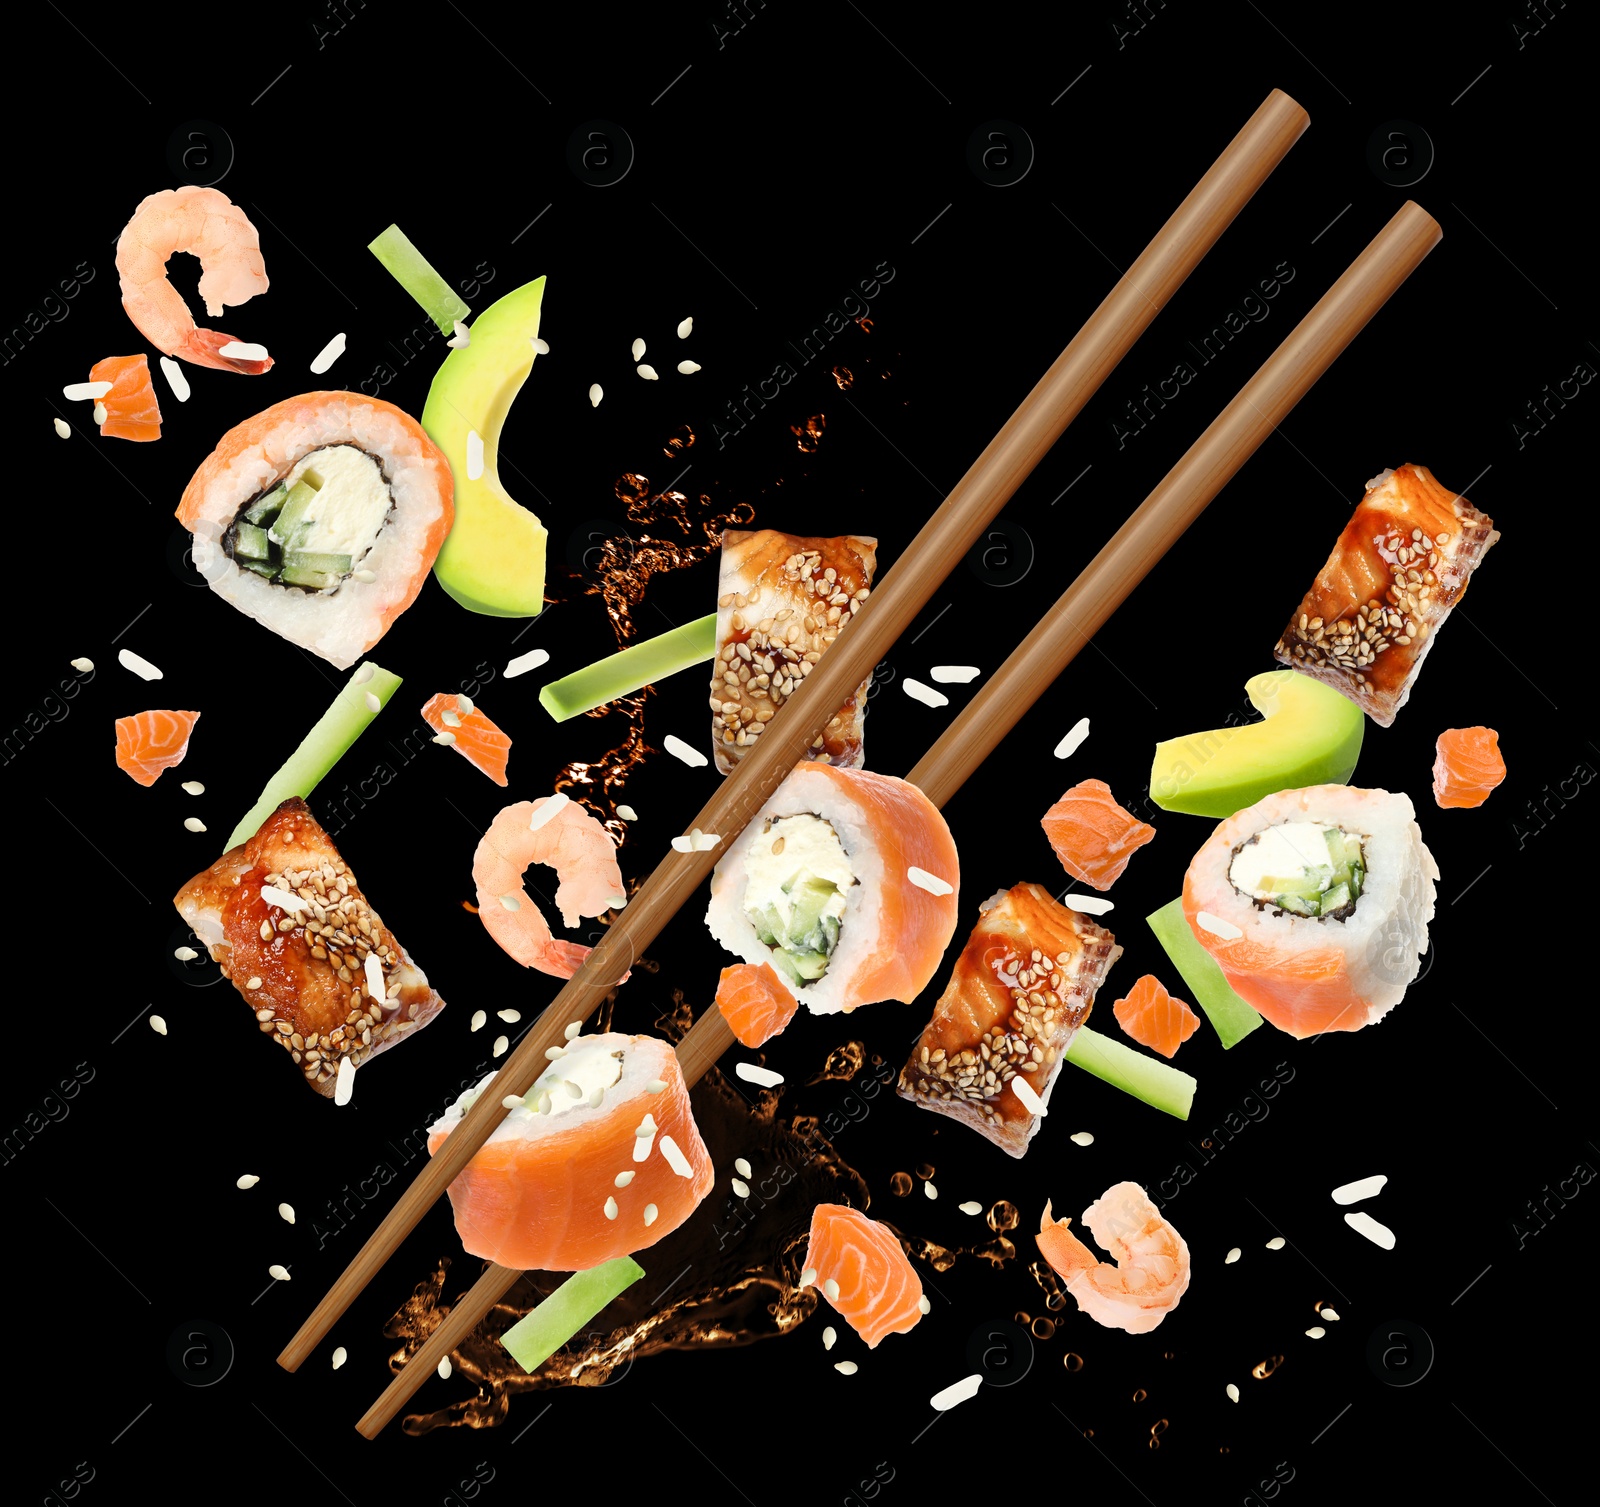 Image of Different sushi rolls and ingredients on black background